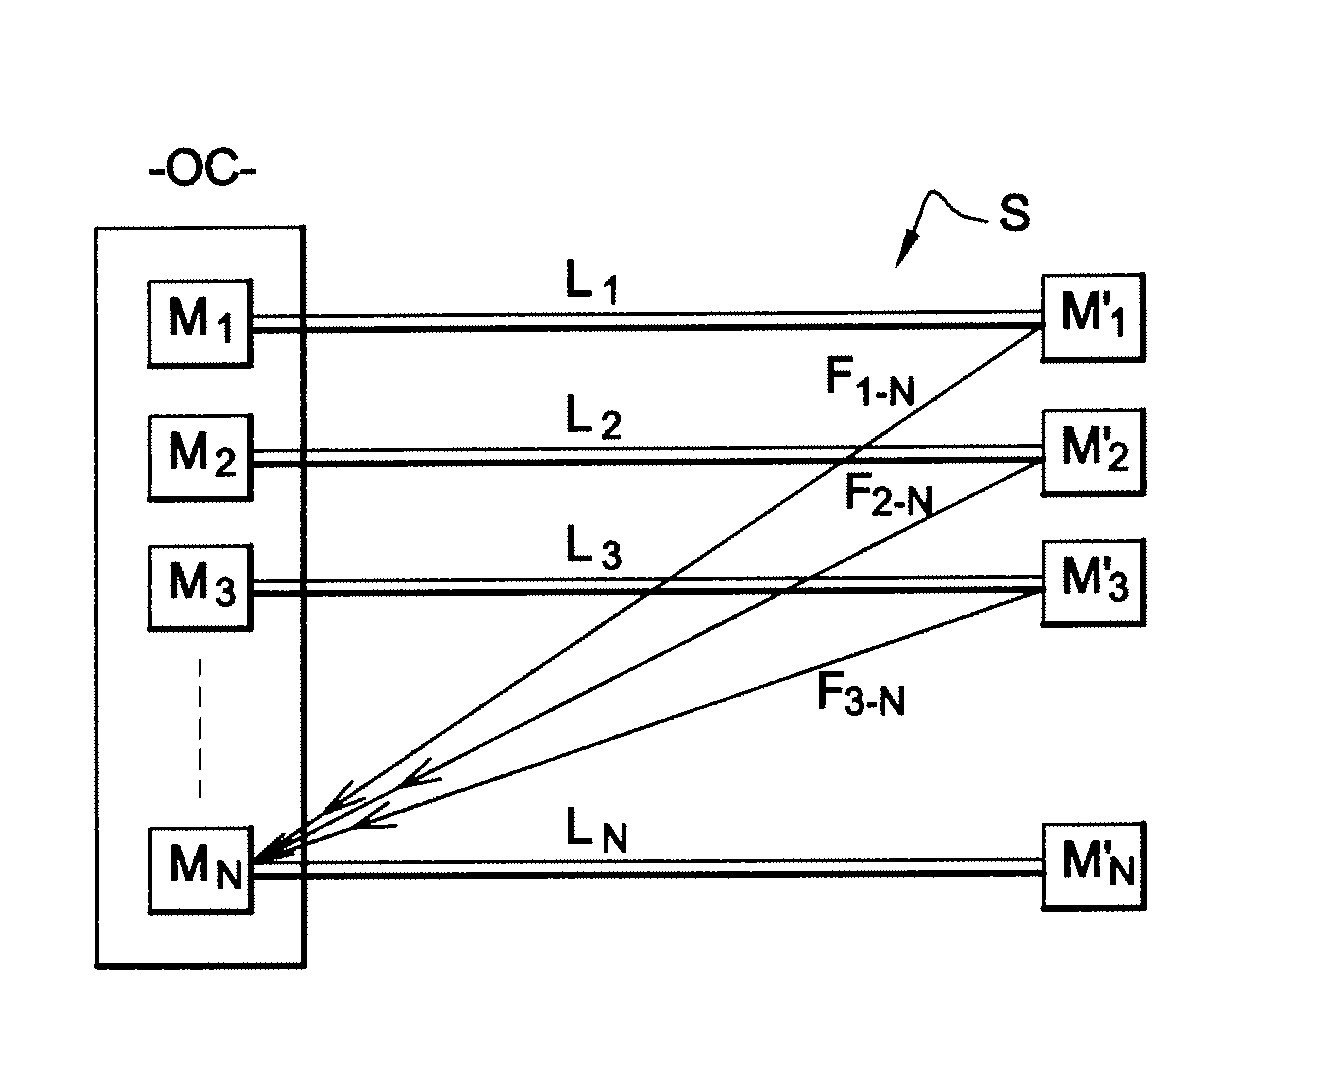 Method of separating sources in a multisource system